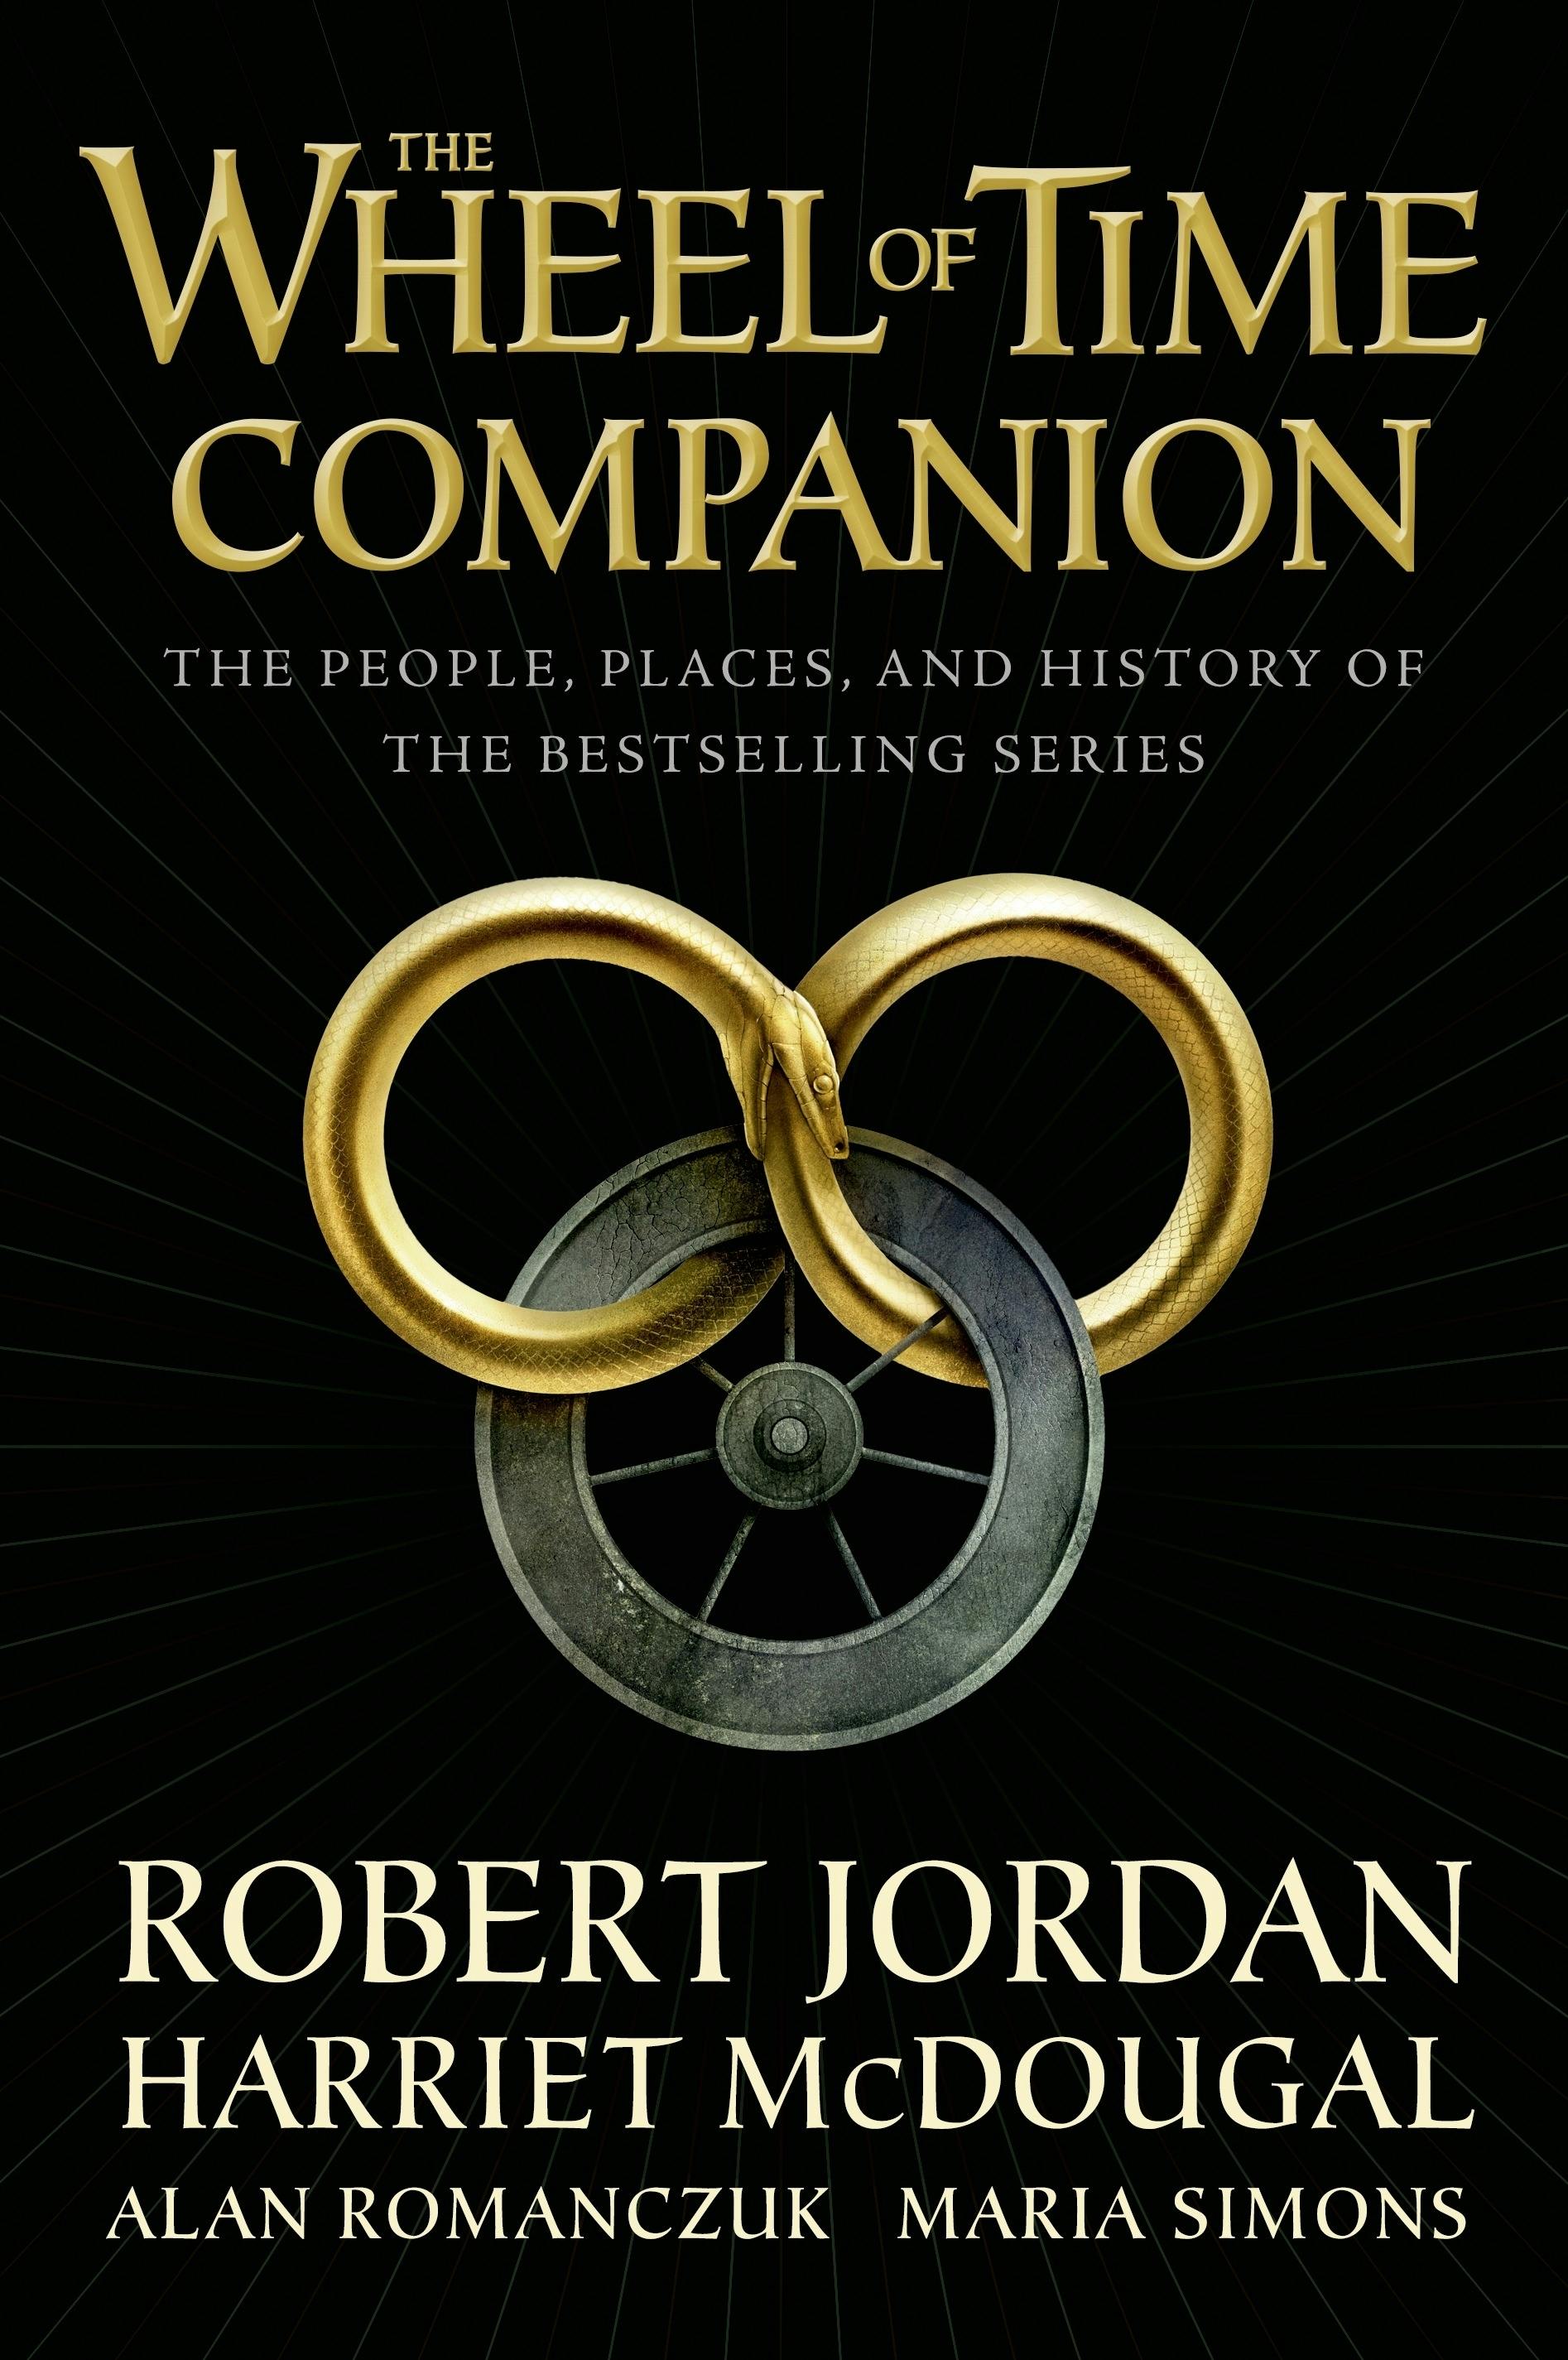 Image of The Wheel of Time Companion